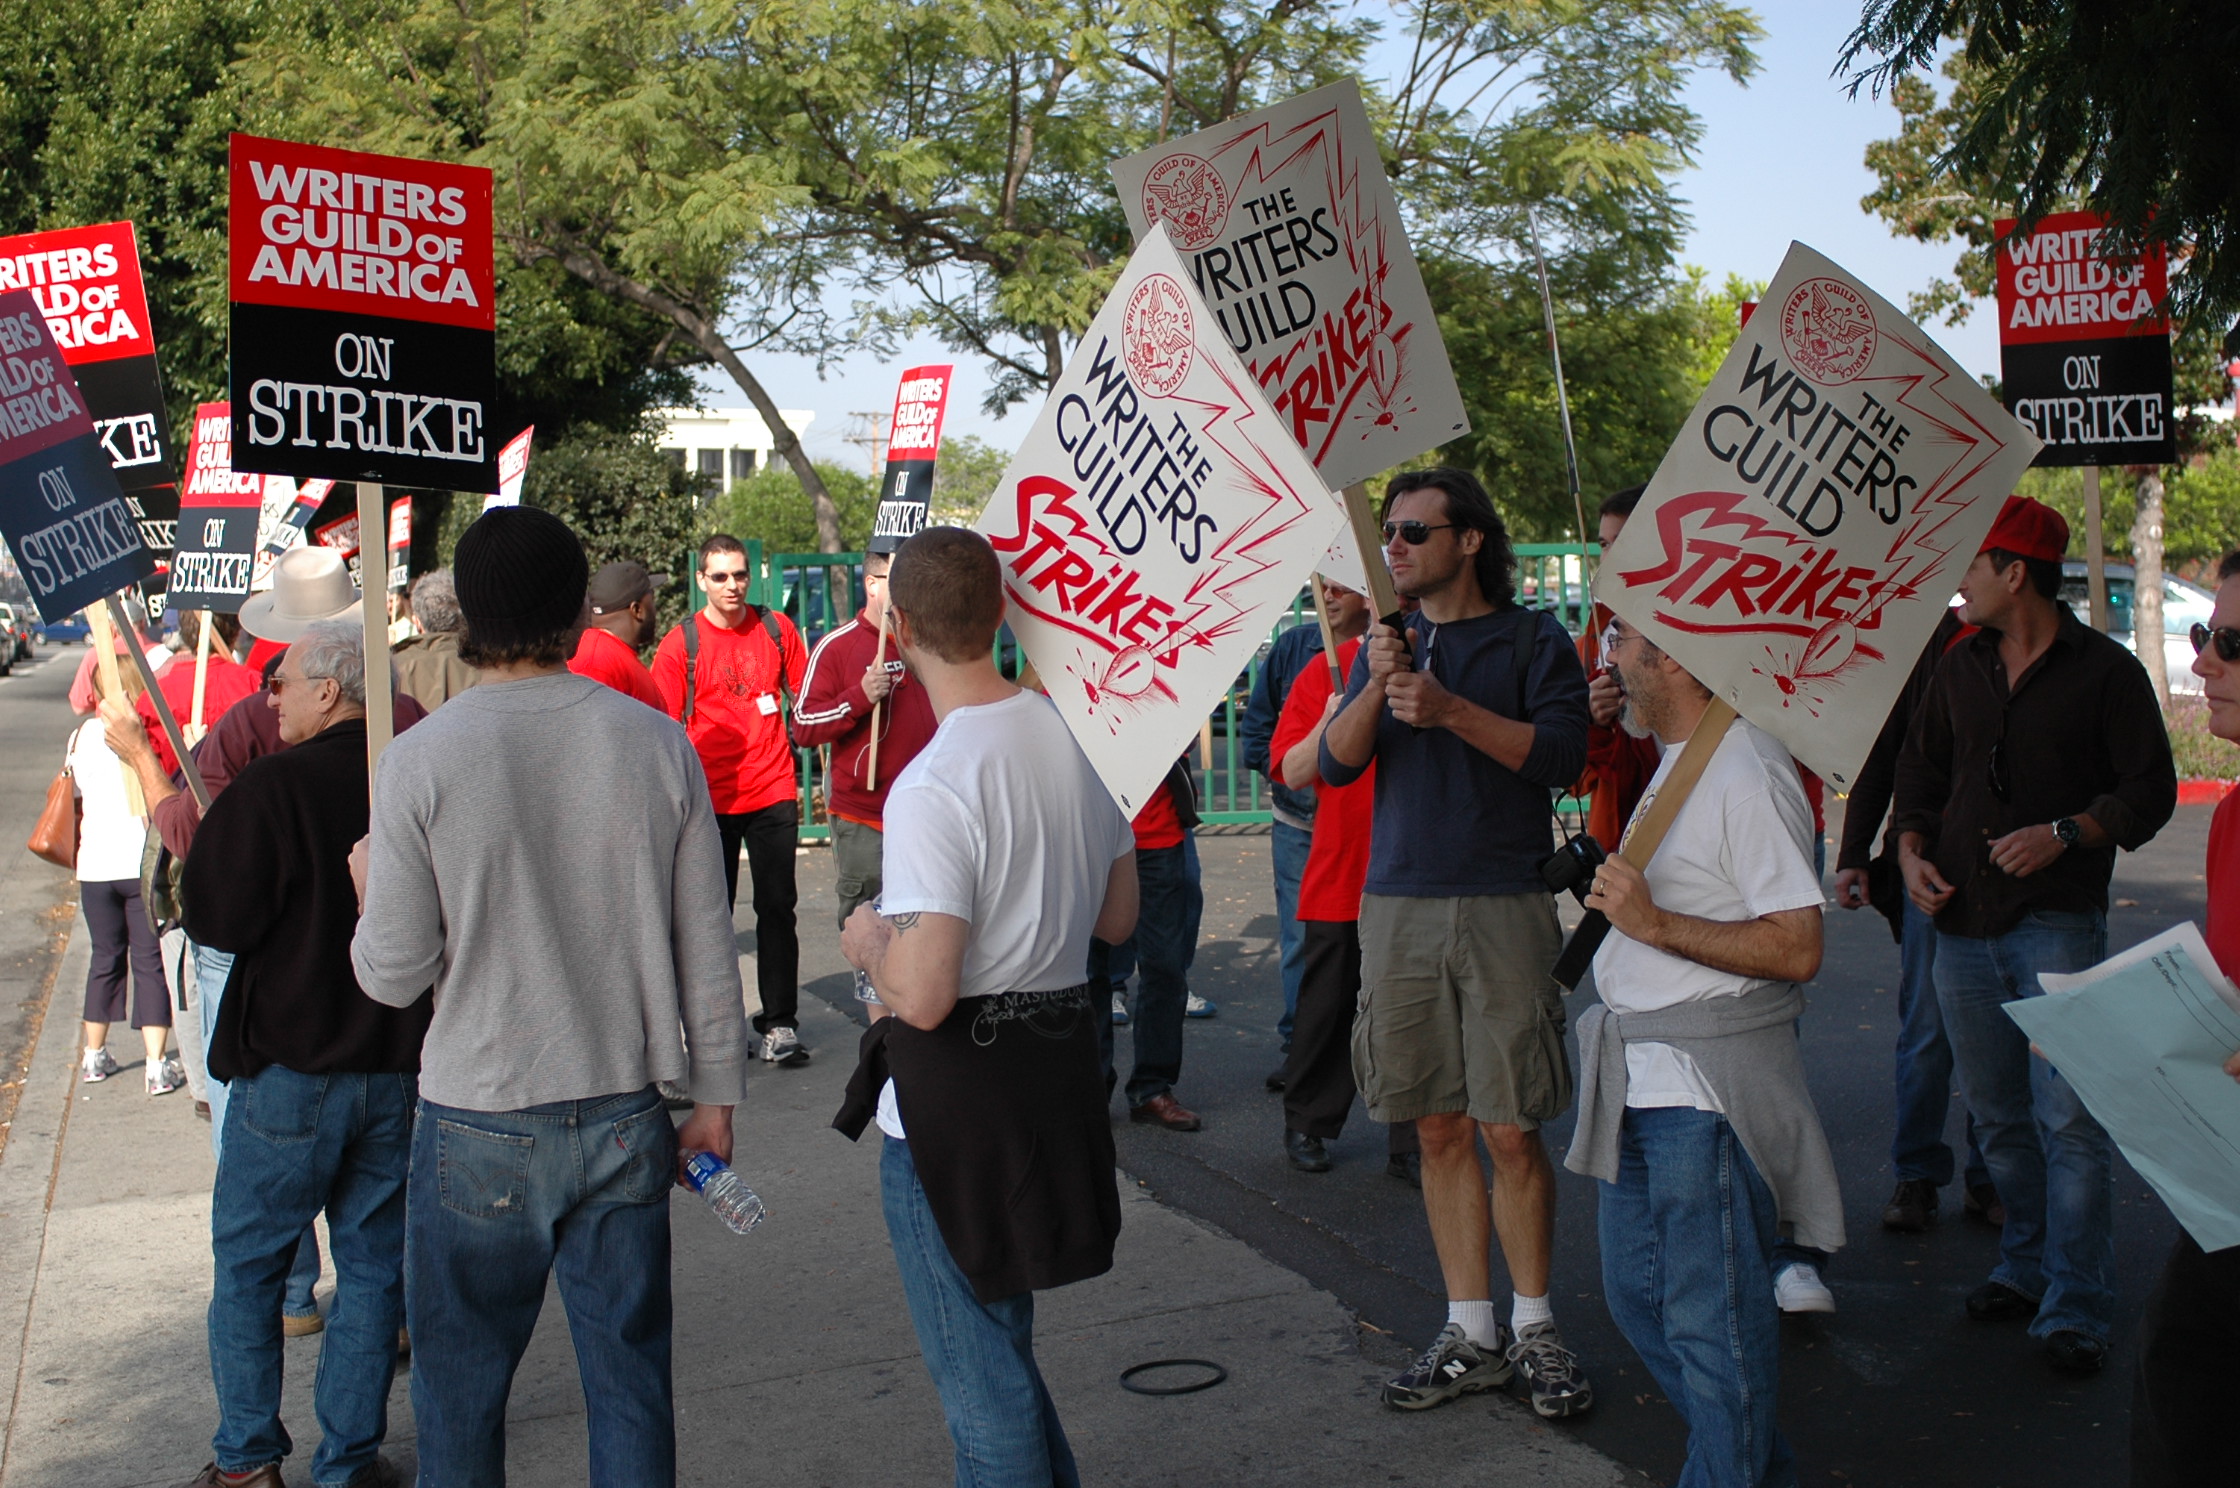 Protesters and writers from the Writers Guild of America strike and protest for higher writer and director wages.